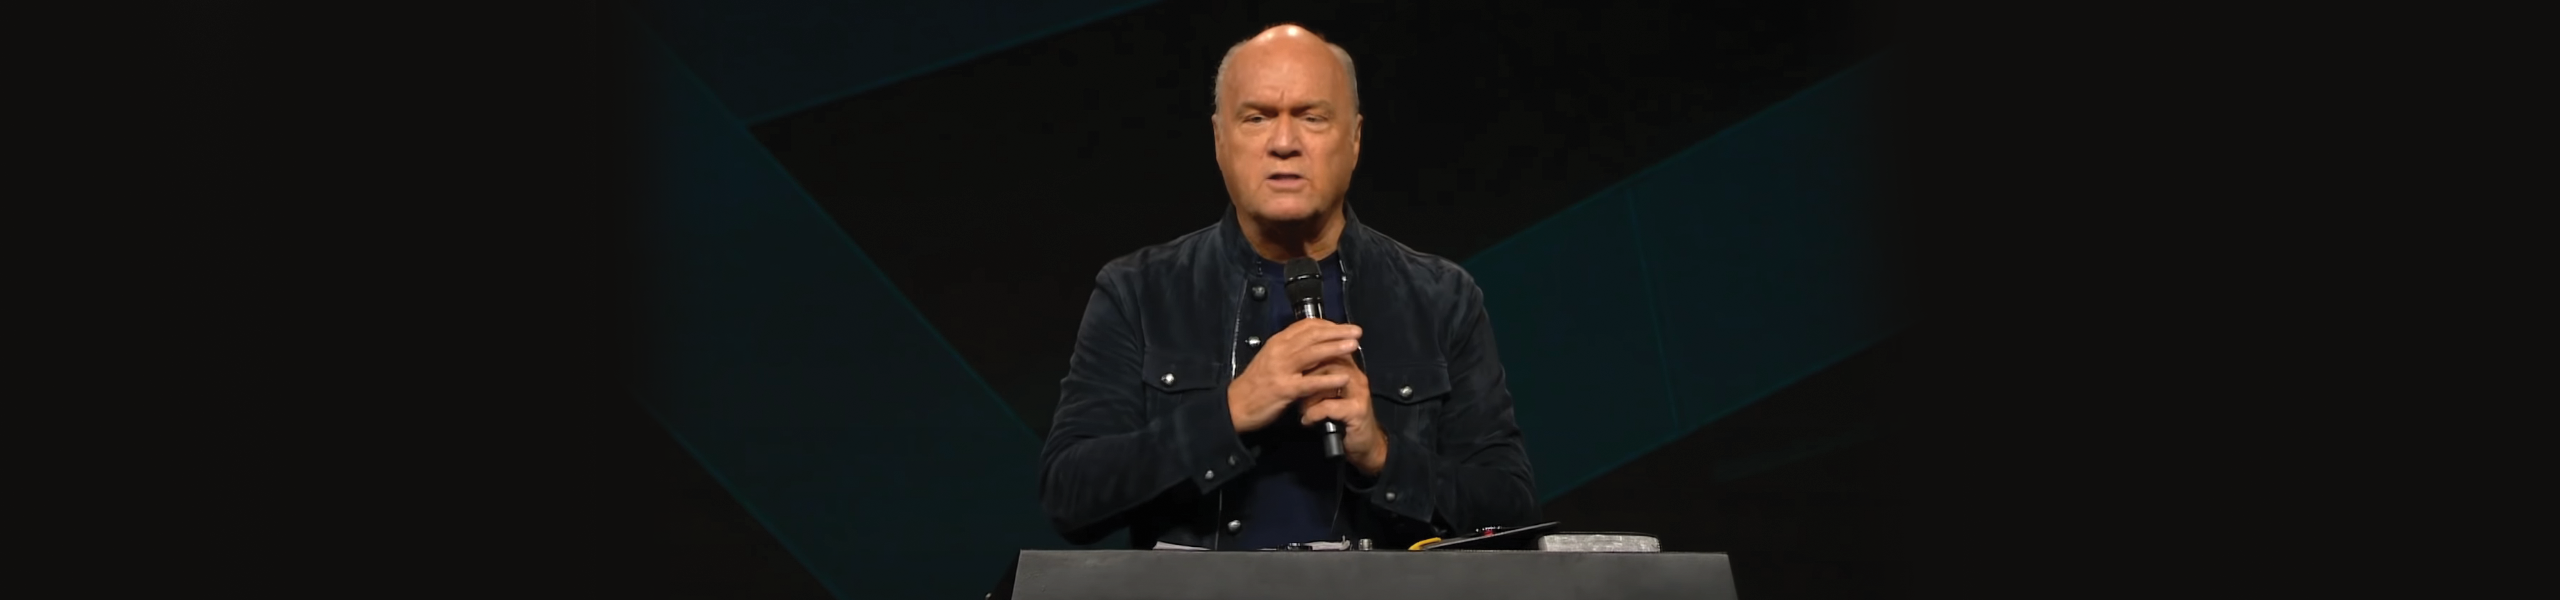 End of Days (The Book of Daniel) | Greg Laurie